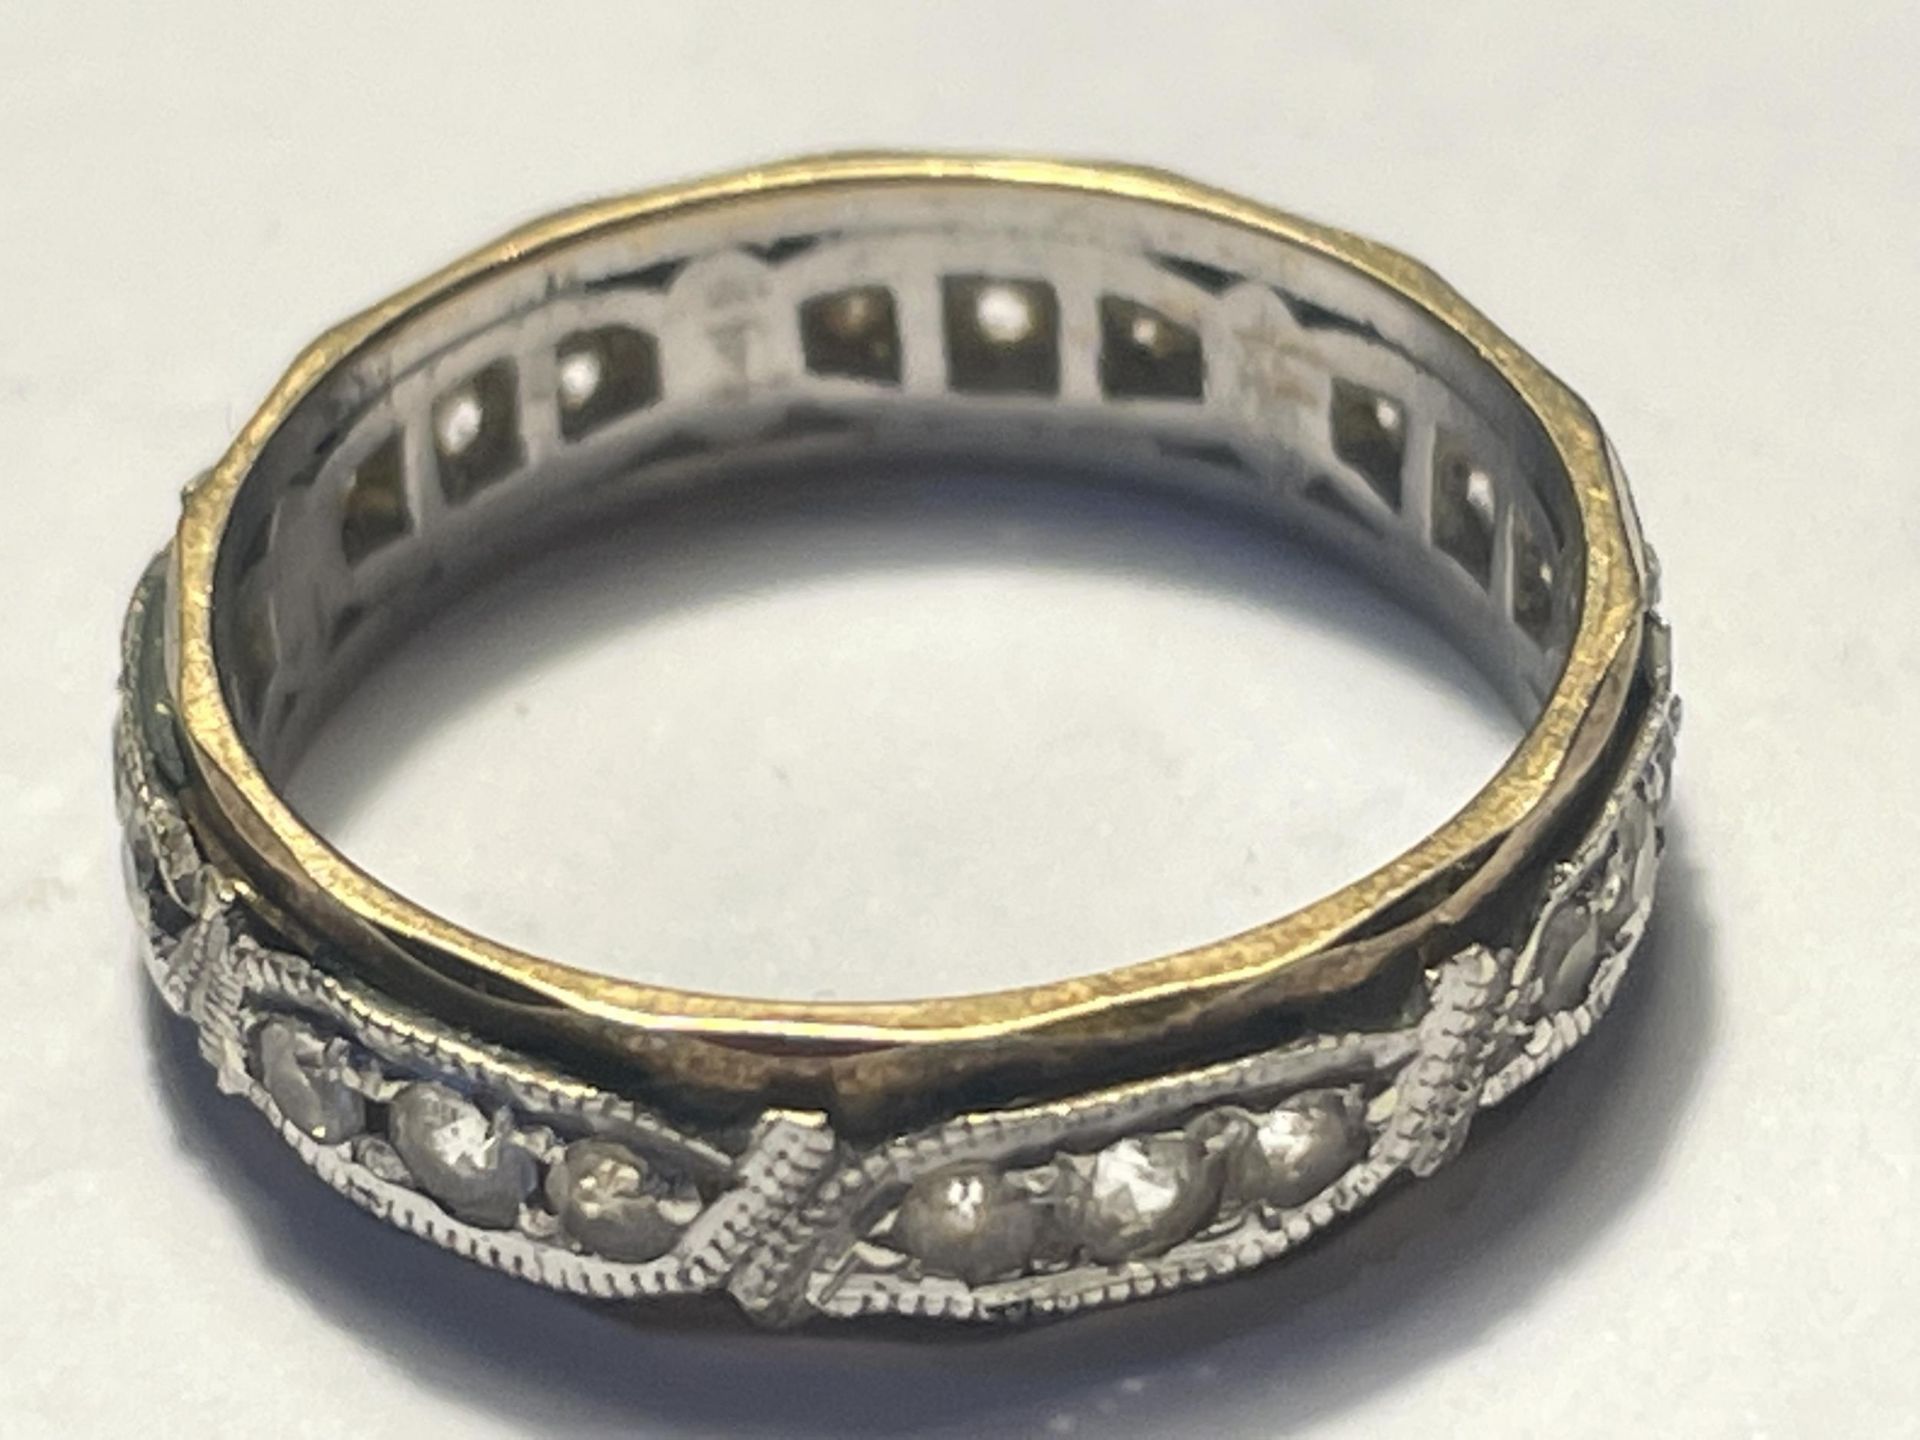 A 9 CARAT GOLD ETERNITY RING WITH CLEAR STONES SIZE L/M GROSS WEIGHT 2.96 GRAMS - Image 2 of 4